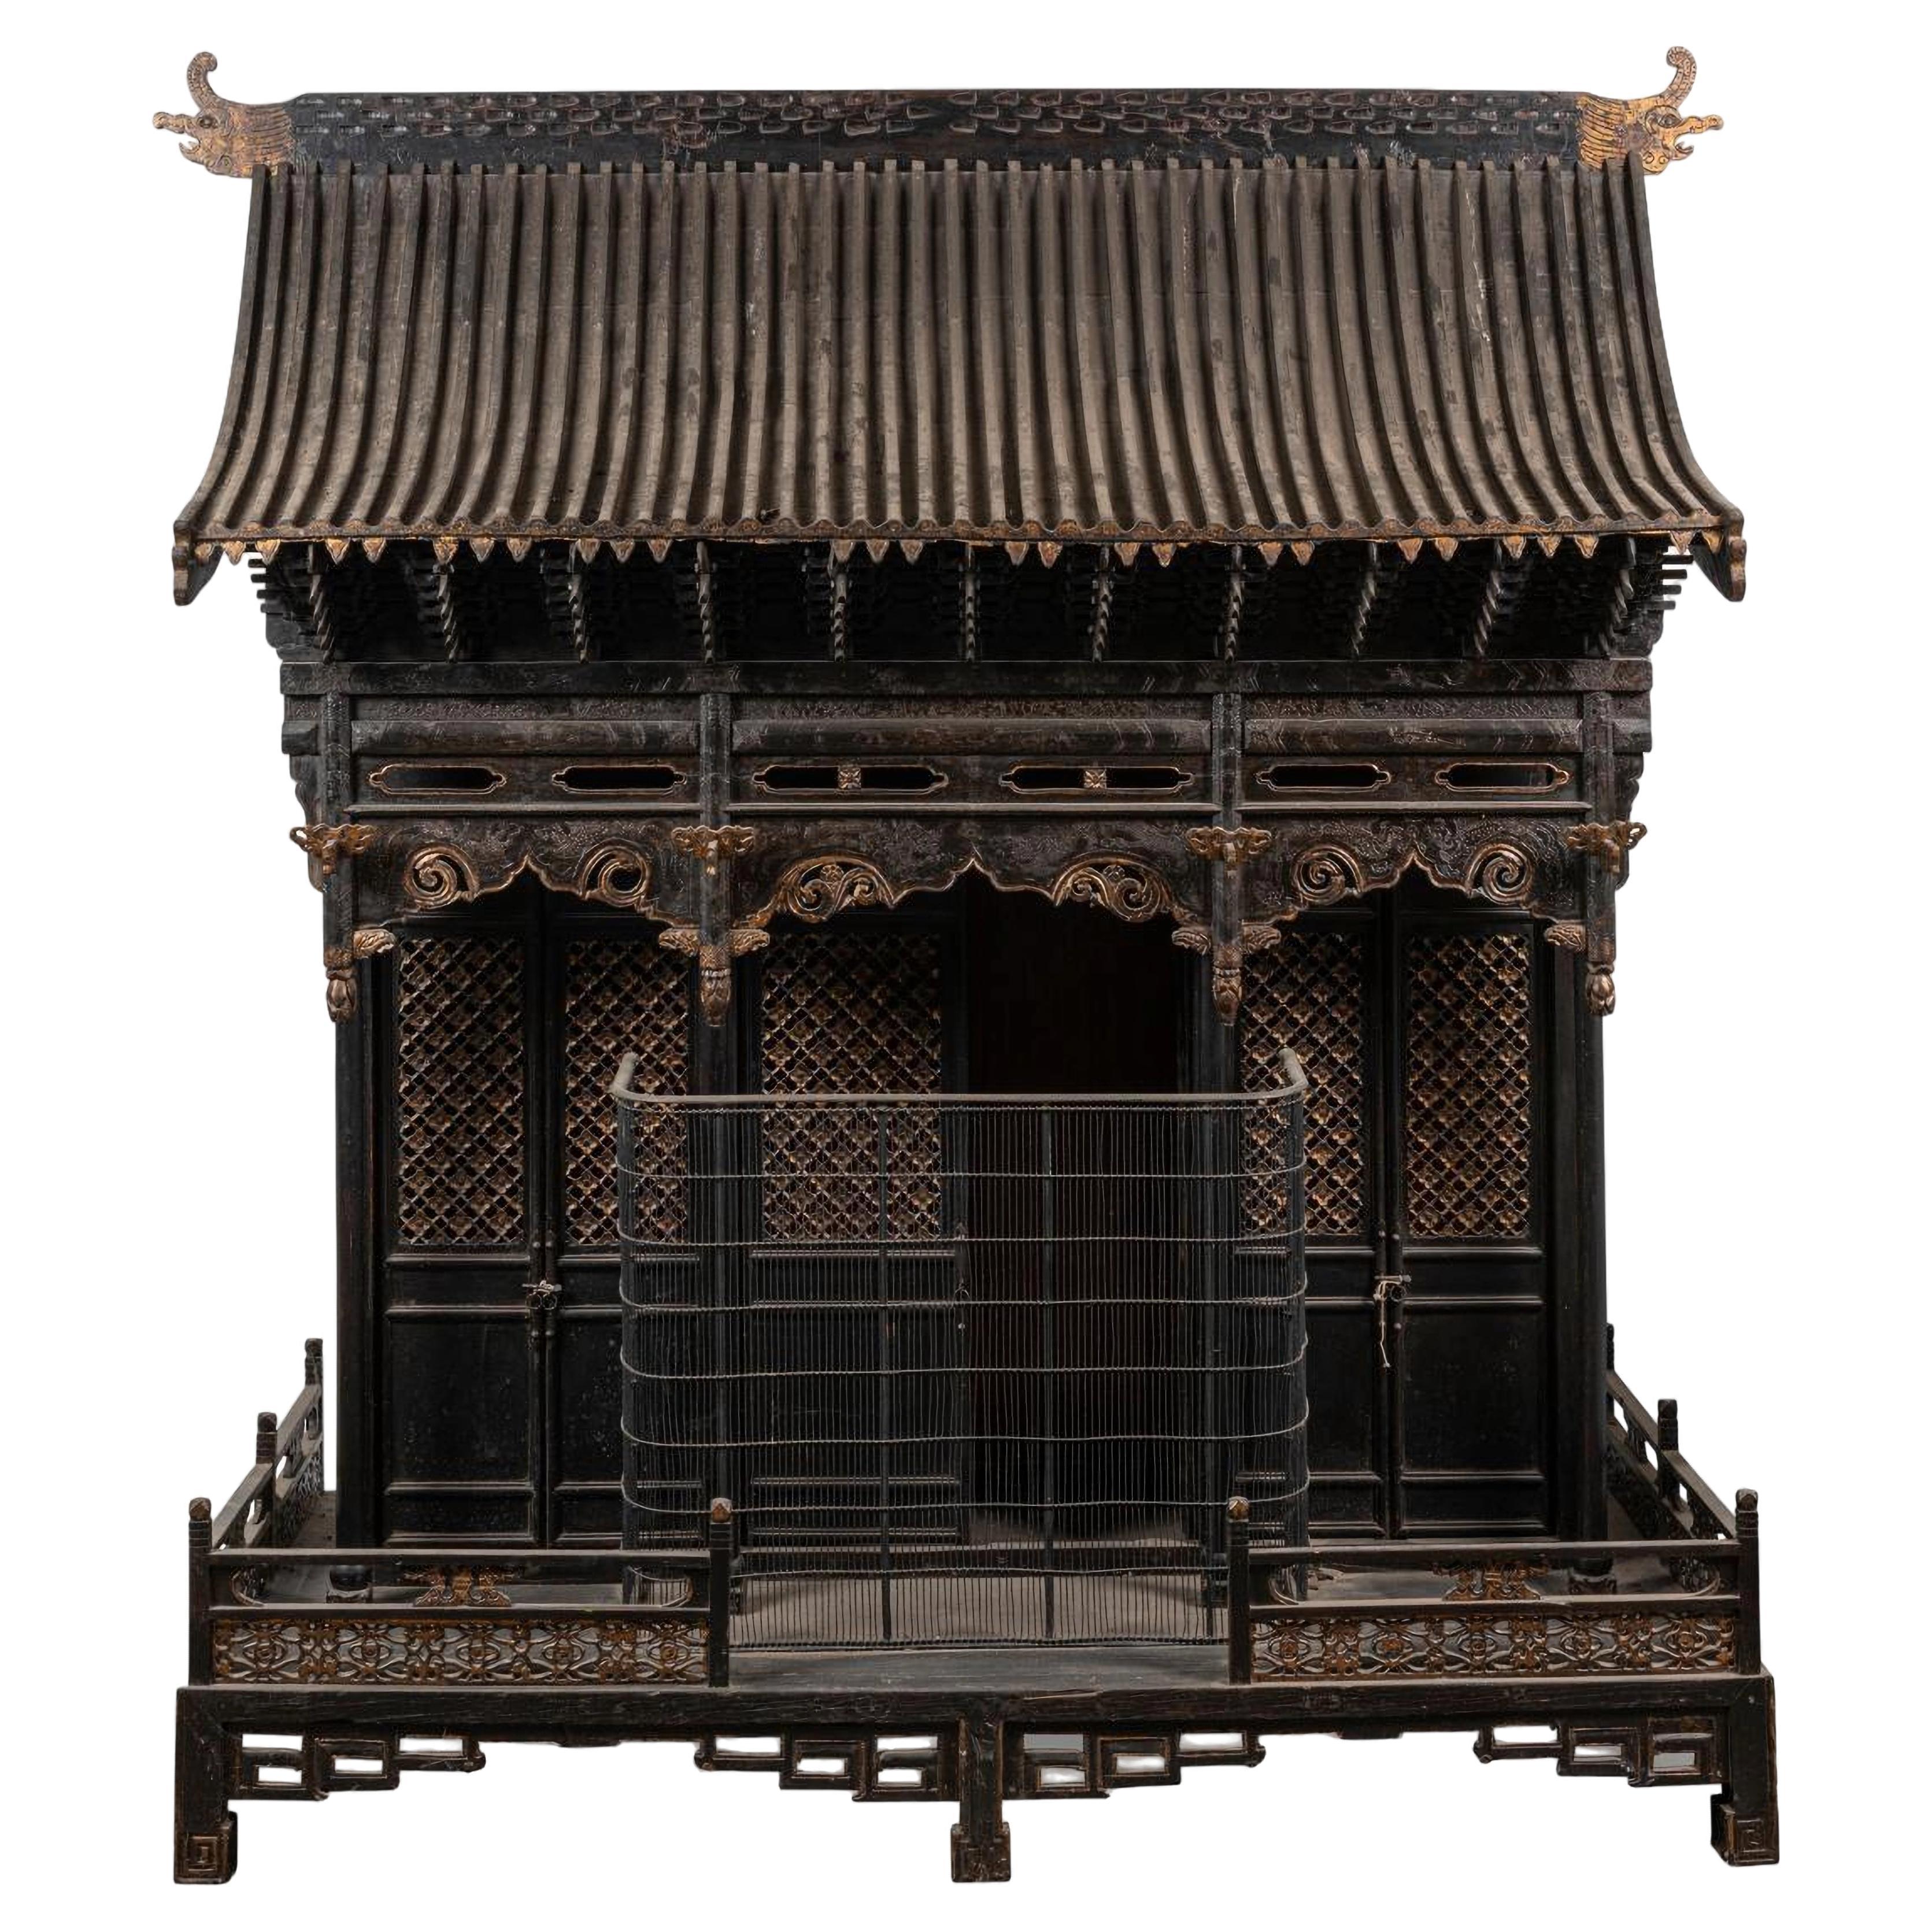 An Impressive Large Chinese Black Lacquered Wood Temple, Late 19th Century For Sale